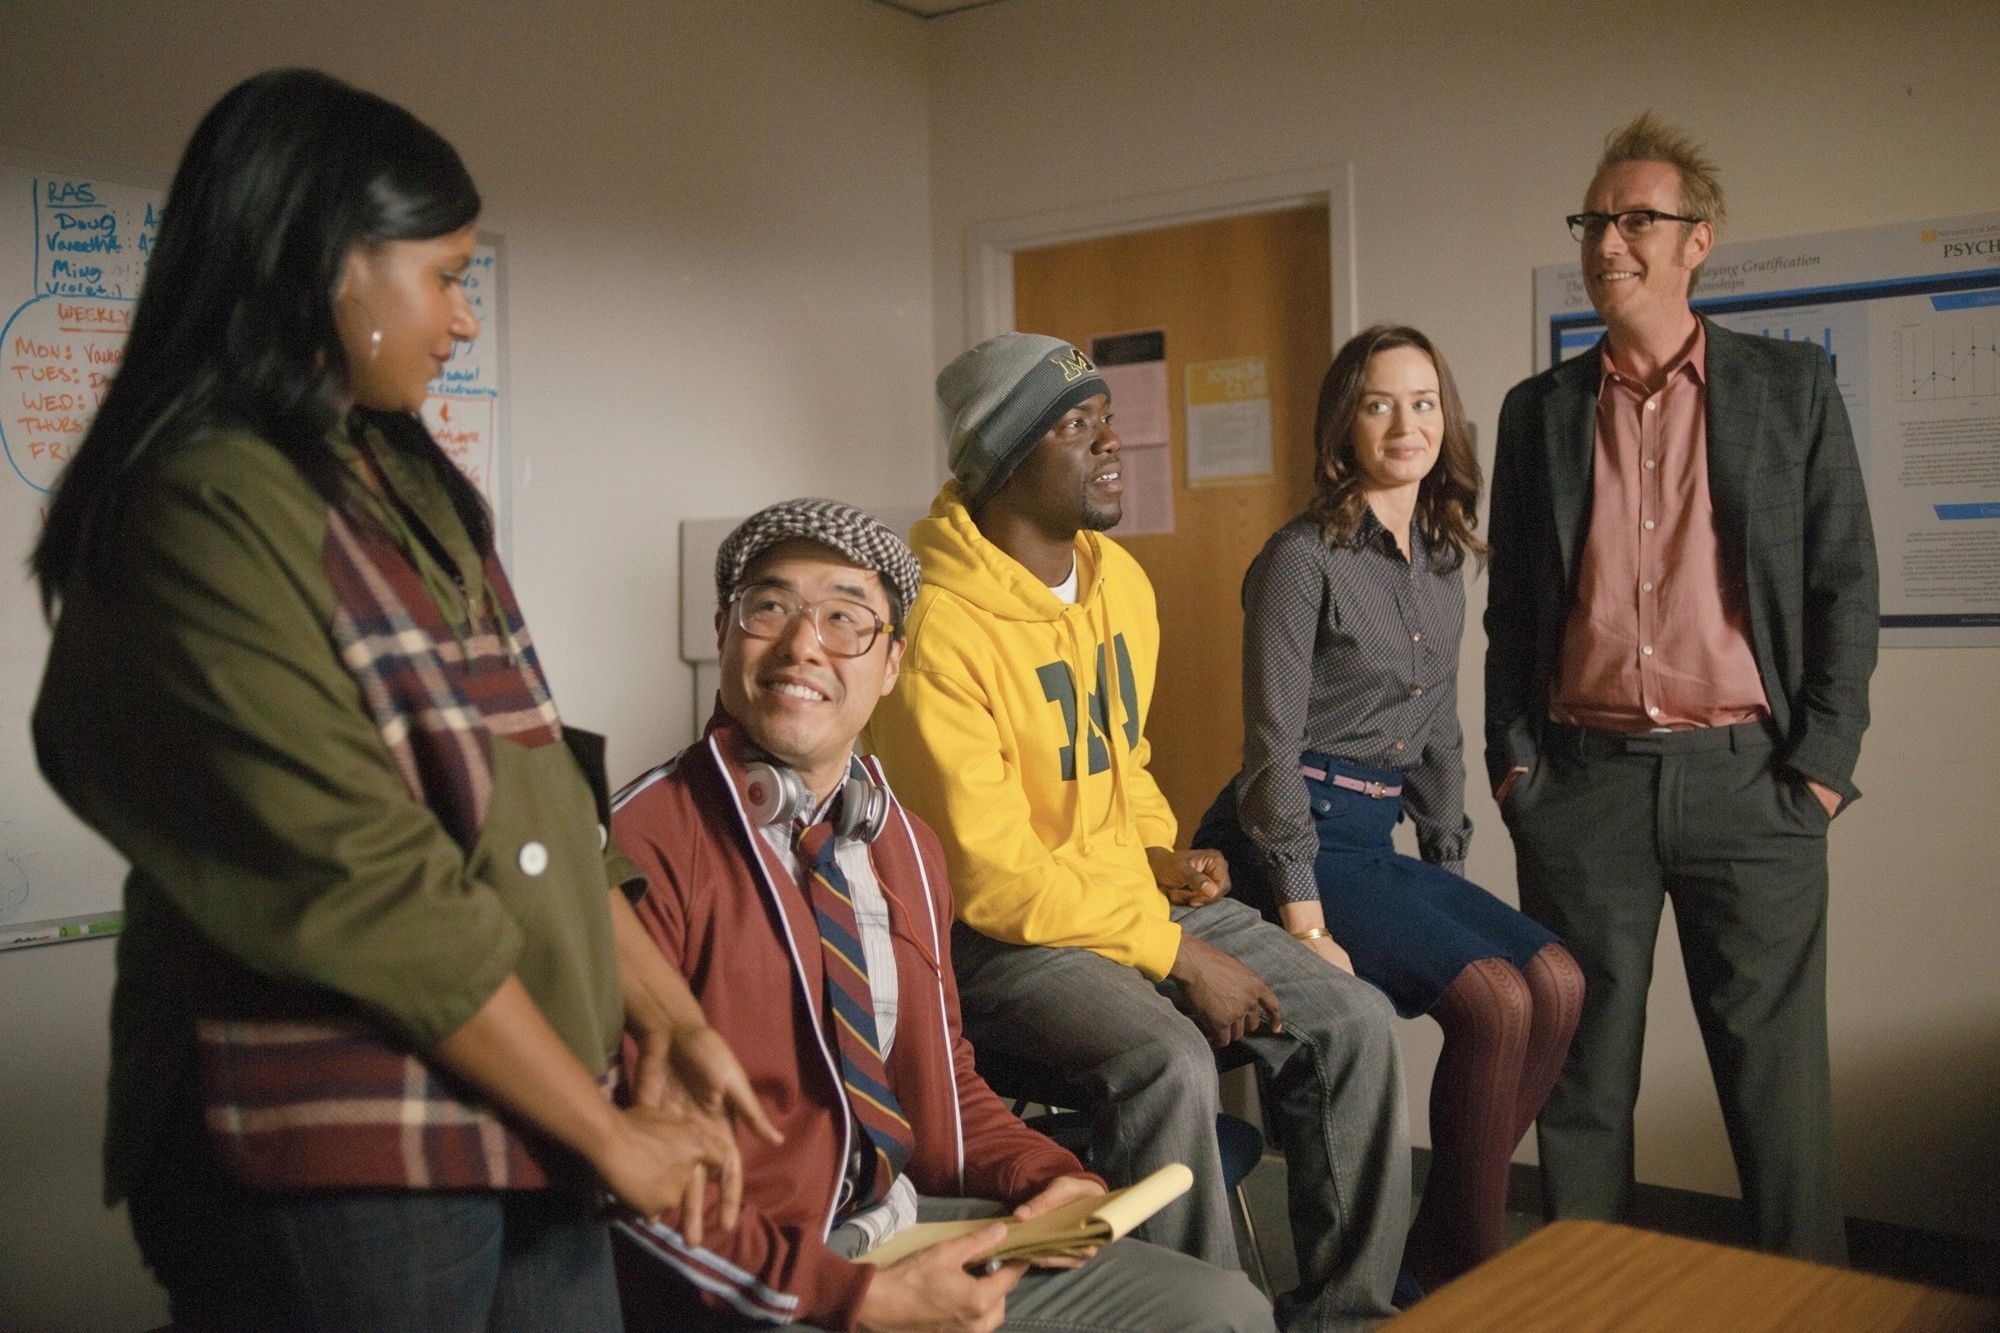 Mindy Kaling, Randall Park, Kevin Hart, Emily Blunt and Rhys Ifans in Universal Pictures' The Five-Year Engagement (2012)